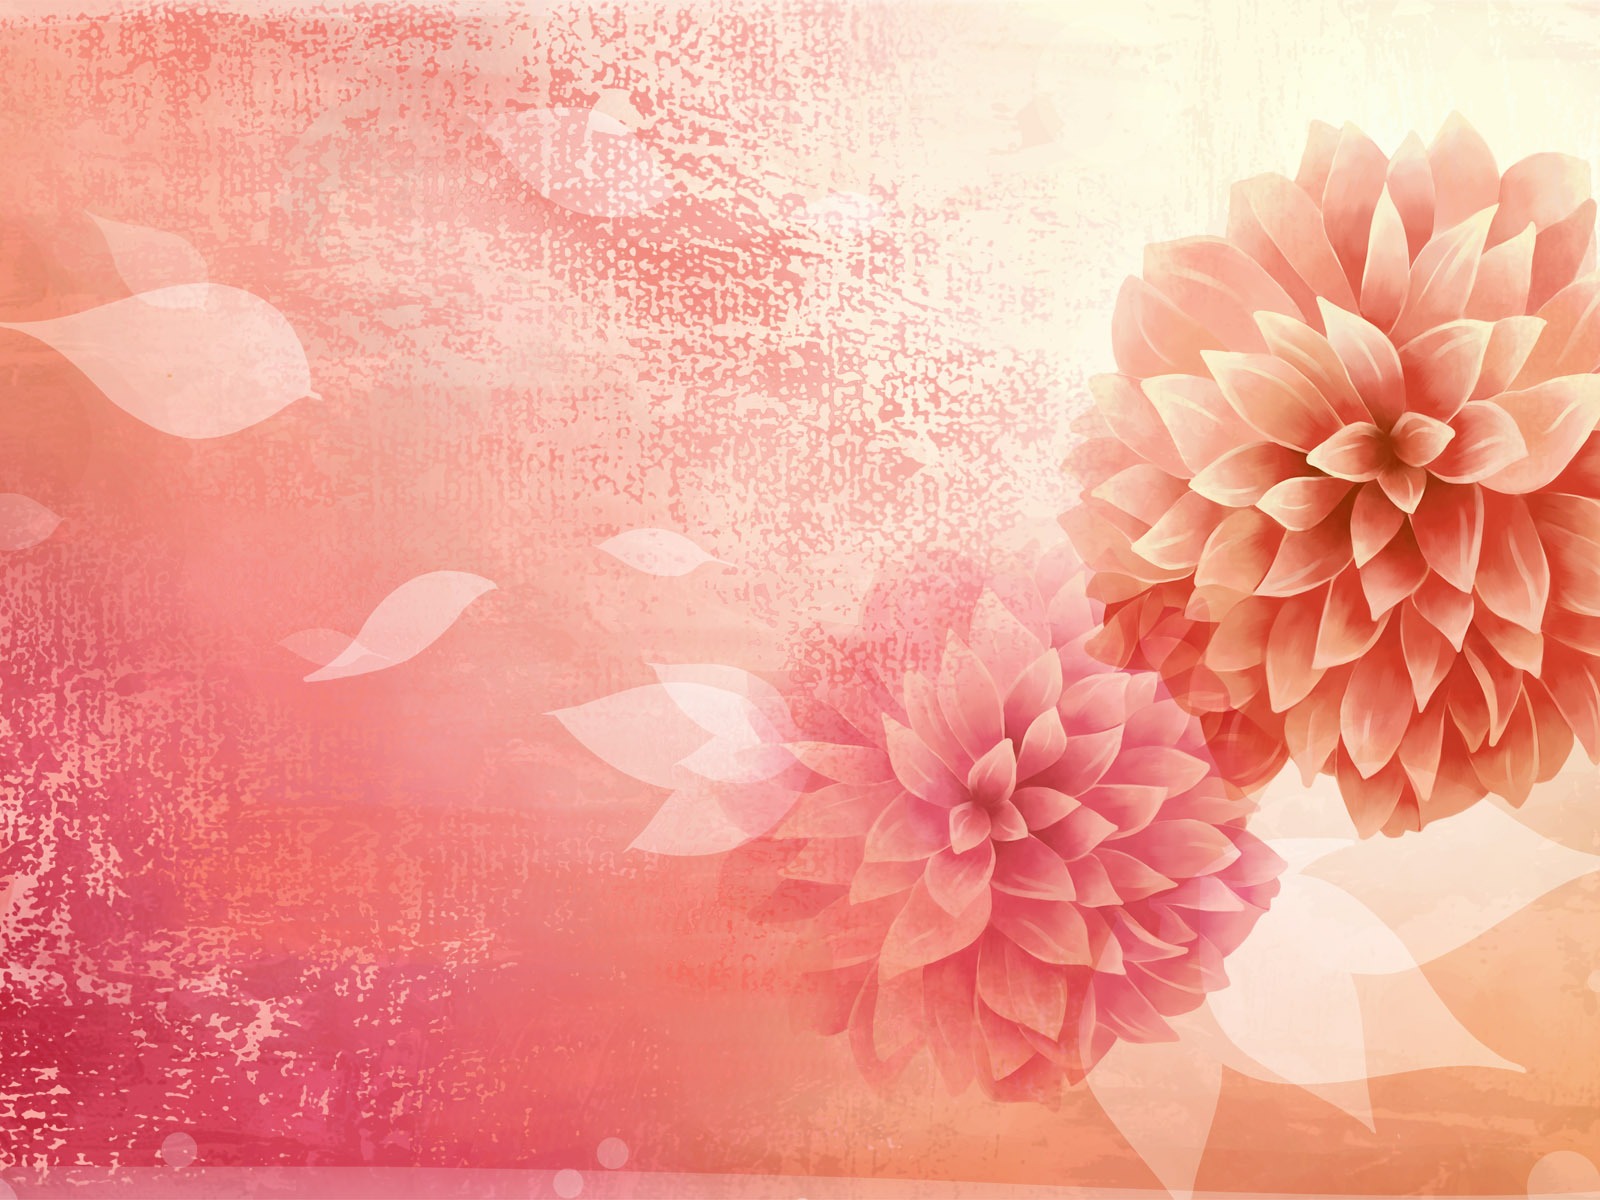 Synthetic Wallpaper Colorful Flower #22 - 1600x1200